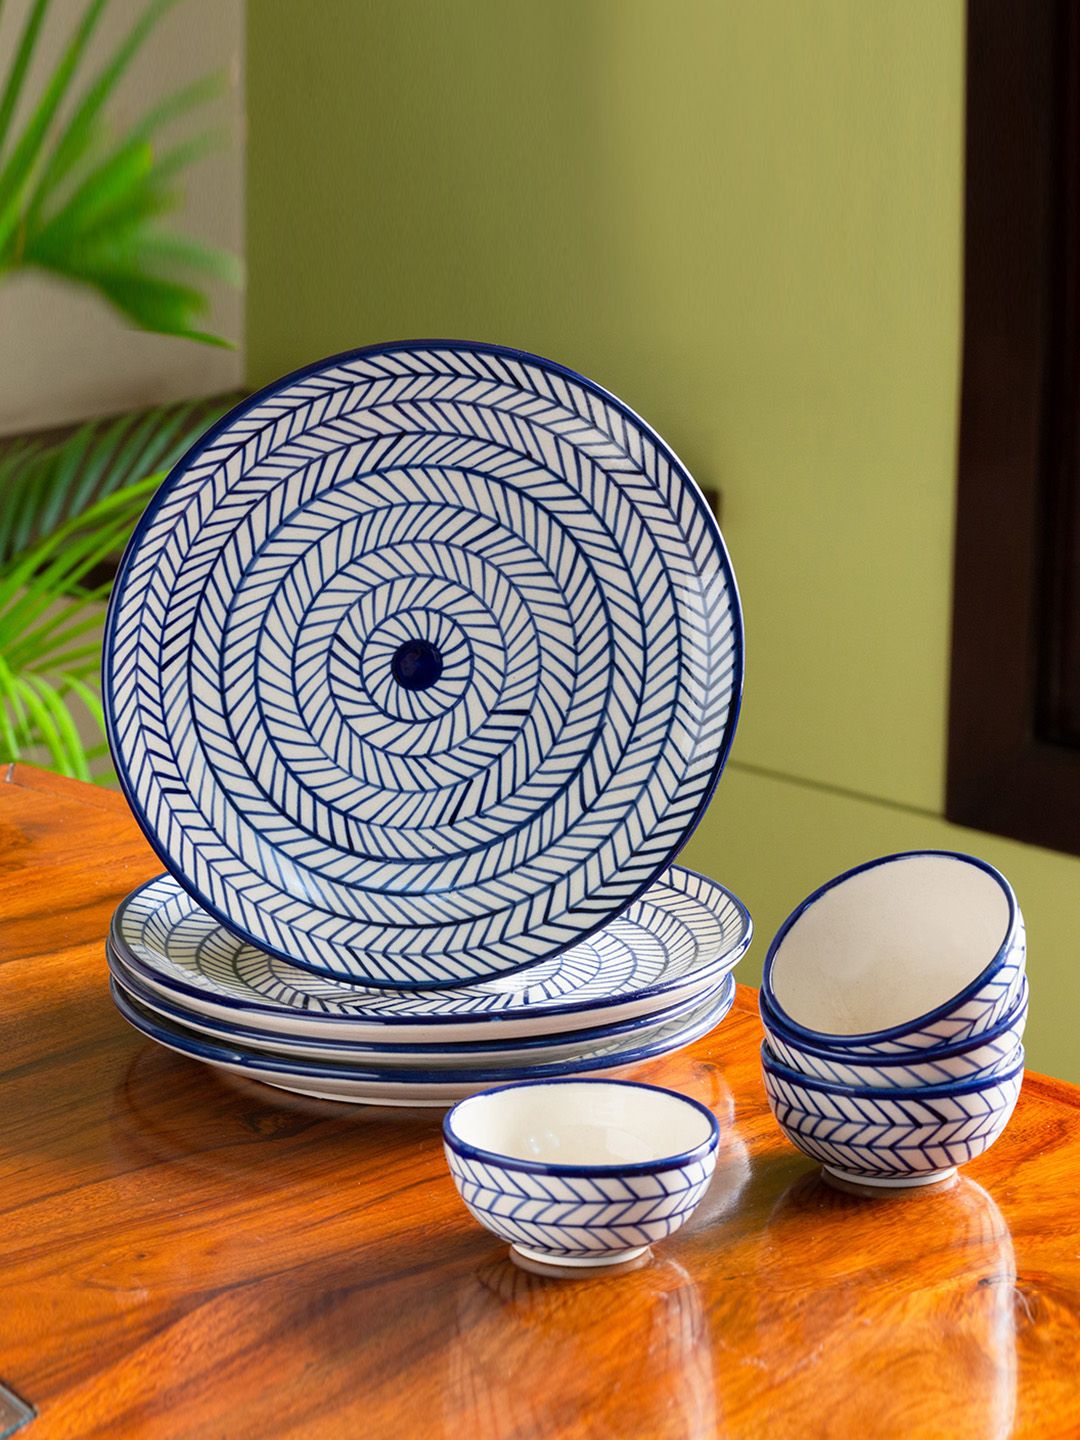 ExclusiveLane Blue & White Chevron Hand-Painted 8 Pcs Ceramic Dinner Plates With Bowls Set Price in India